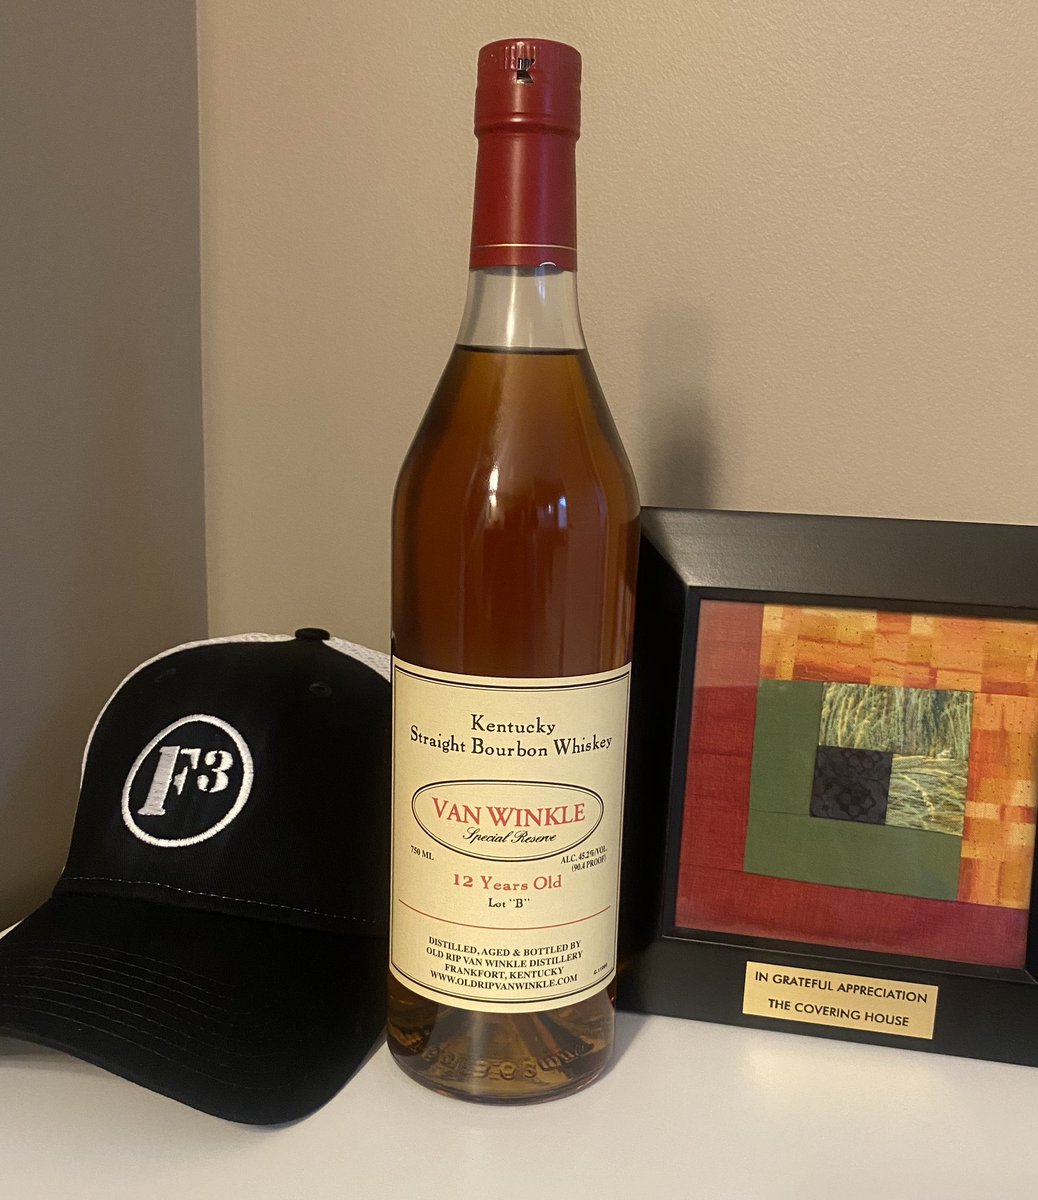 $25 for a chance to win a bottle of 12yr Pappy’s?? Or you can buy a bottle for $1000. All proceeds go to help underage survivors of human trafficking at The @CoveringHouse. #miles4tch #bourbon e.givesmart.com/events/x49/